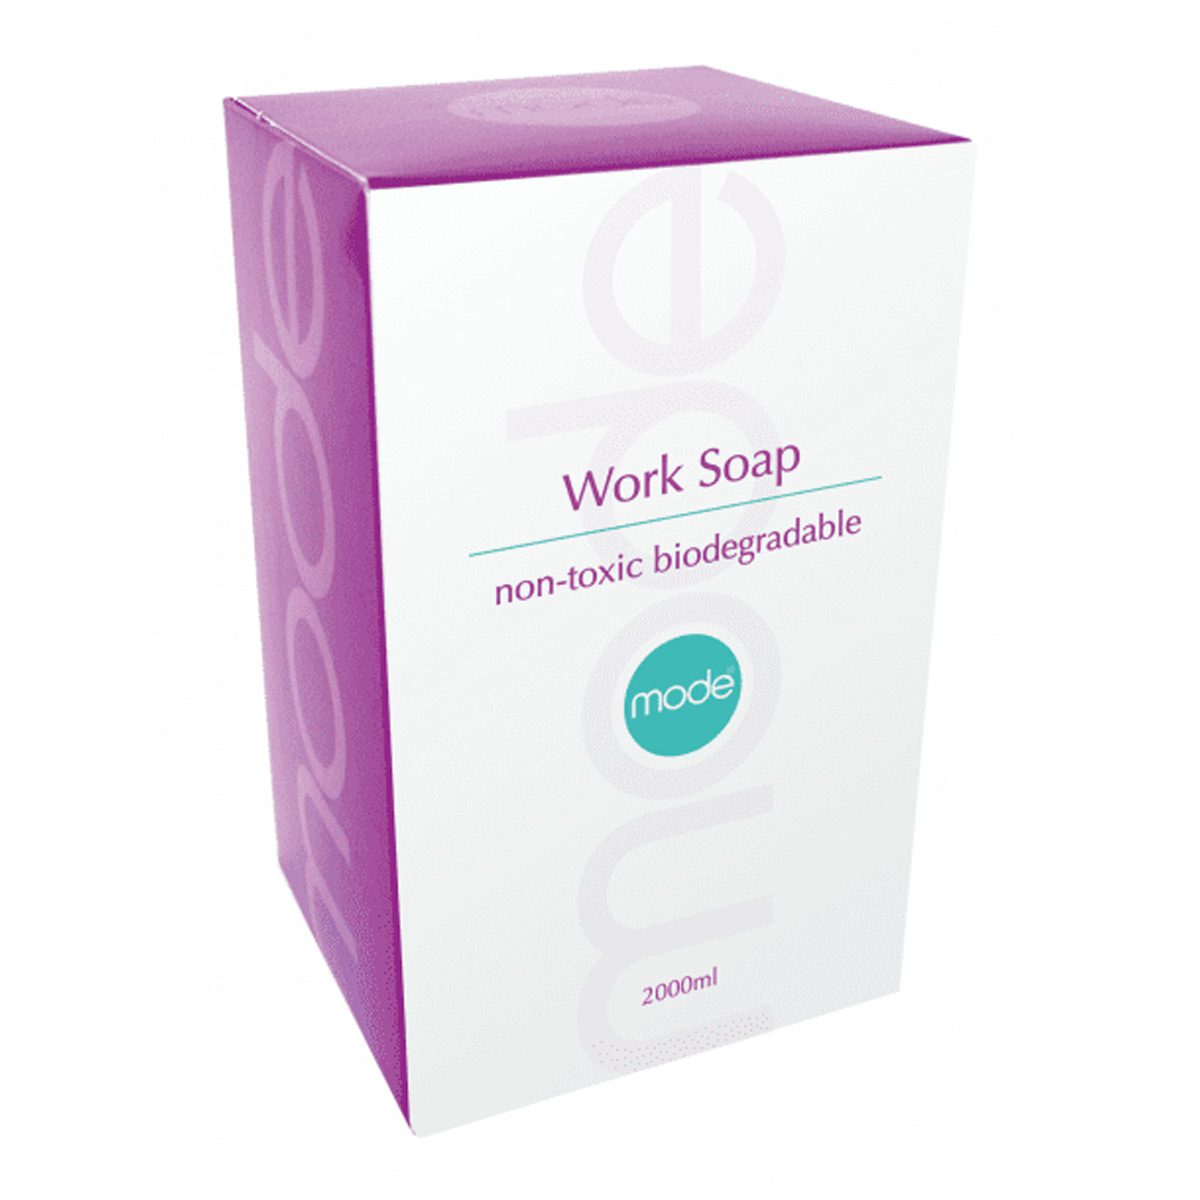 washroom-skincare-hand-cleaner-mode-work-soap-2L-litre-2000ml-heavy-duty-solvent-free-hand-cleaner-non-abrasive-crushed-walnut-shell-enhance-cleaning-vjs-distributors-MWS2